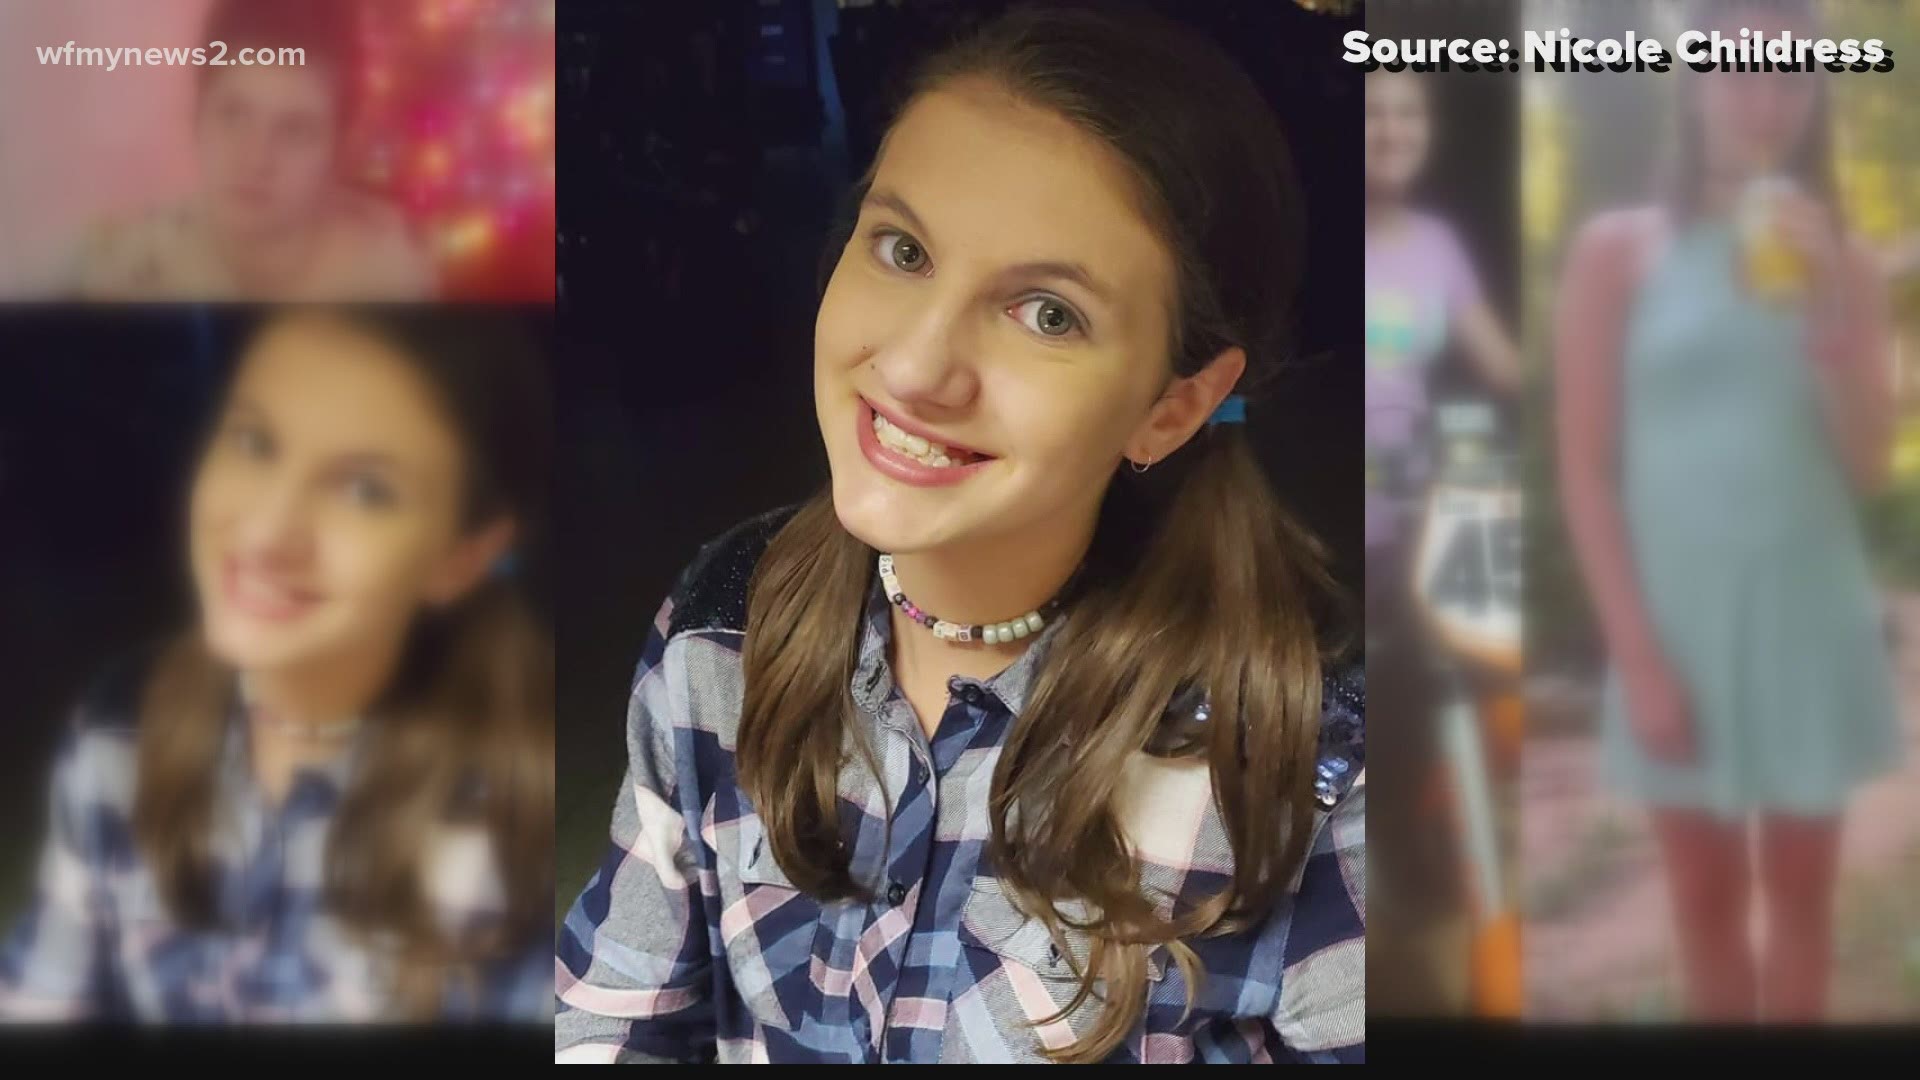 Authorities are still searching for 14-year-old Savannah Childress. A search party is scheduled to look for her on Saturday.